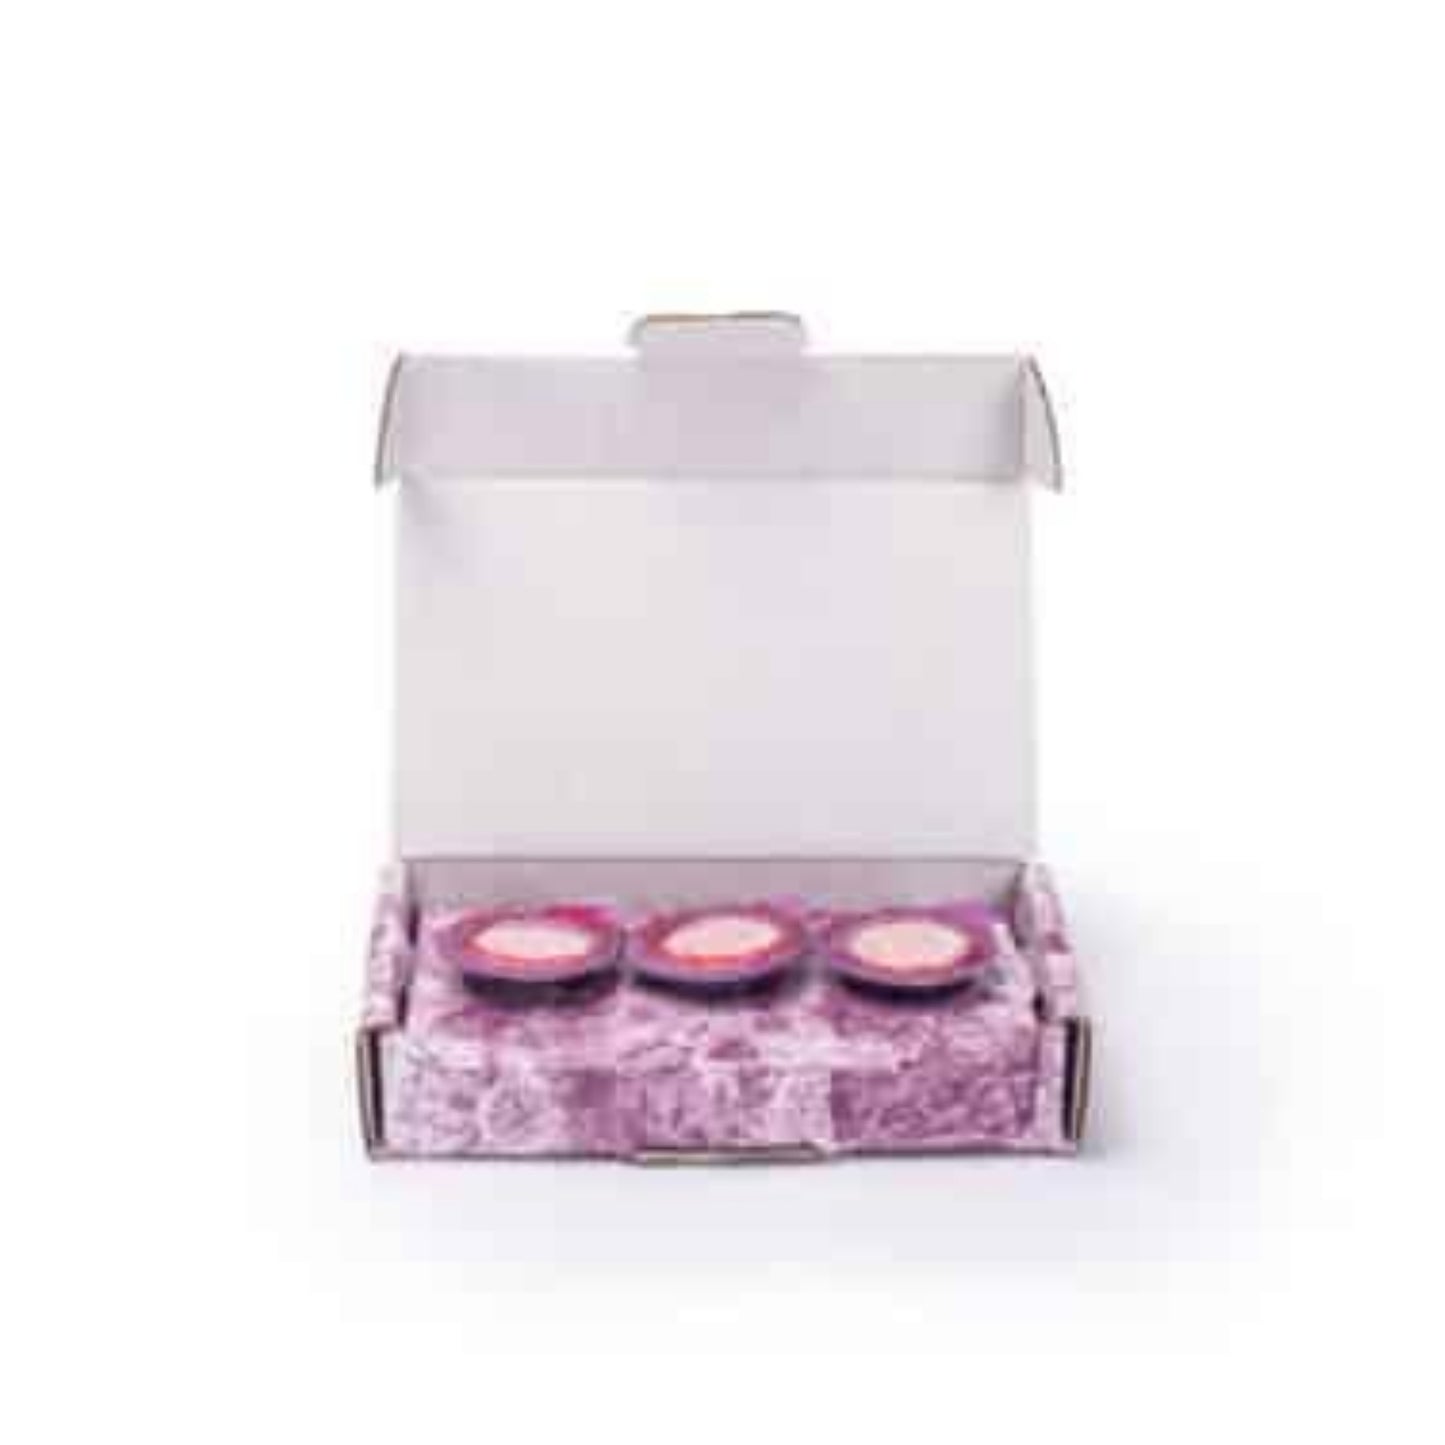 Prefilled Communion Cup 3 Count